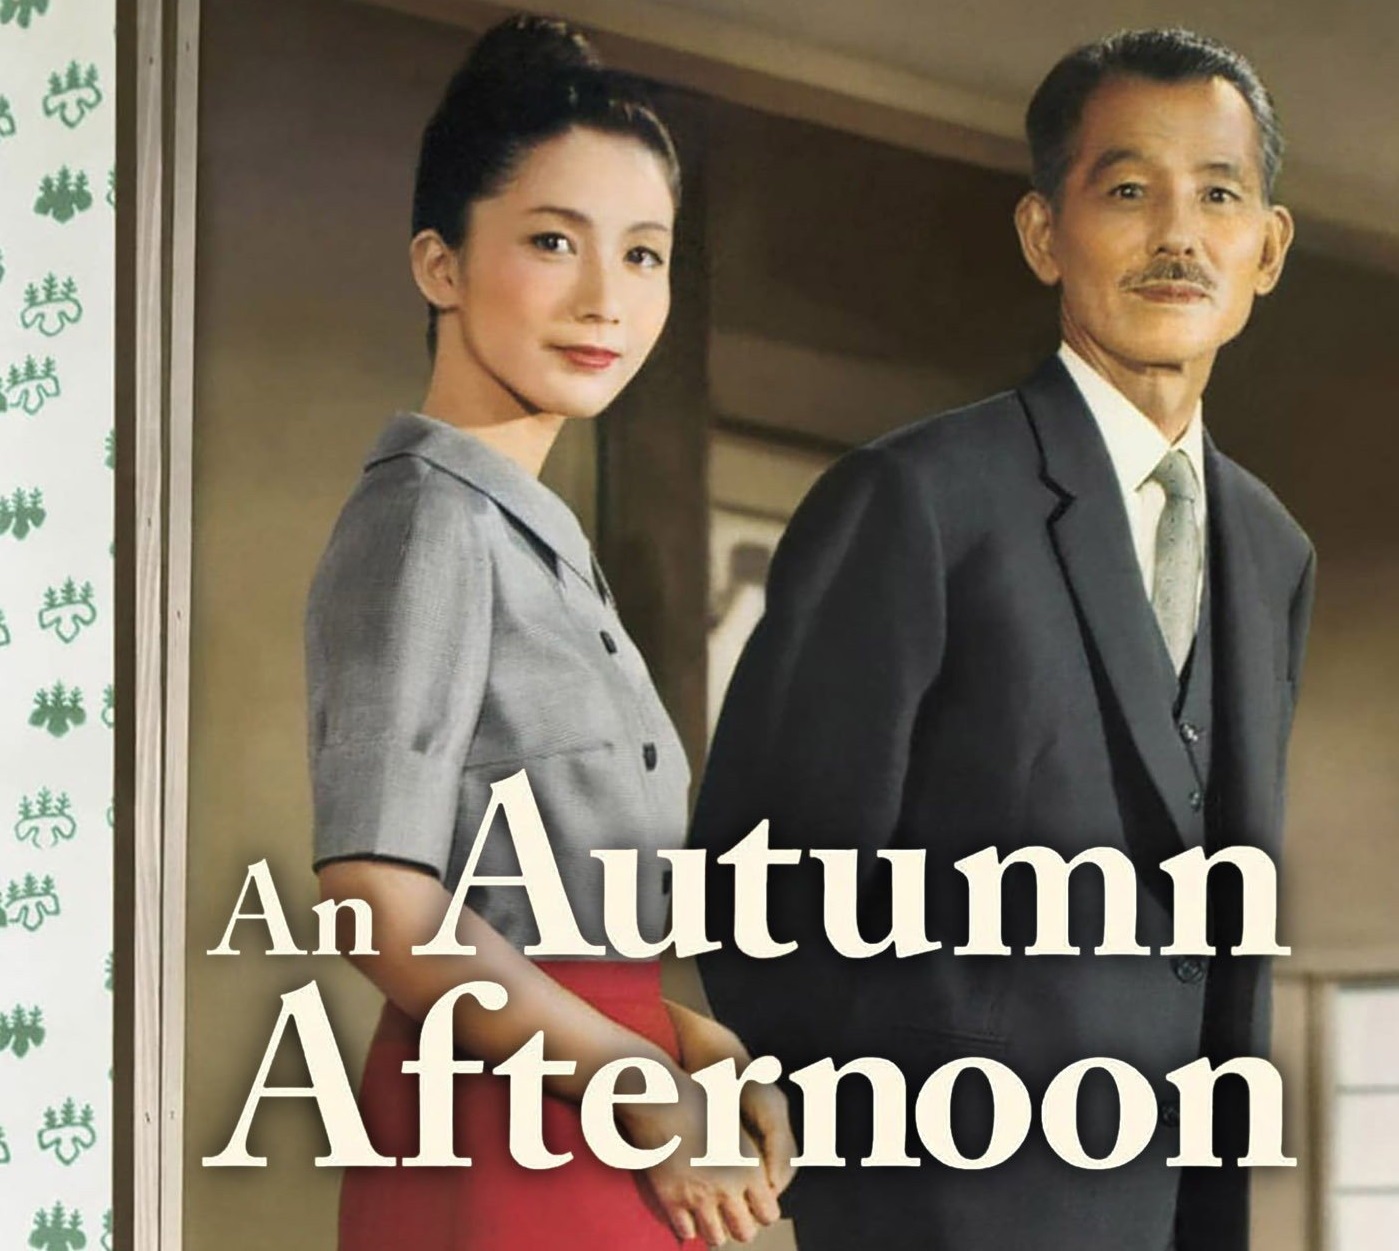 40-facts-about-the-movie-an-autumn-afternoon